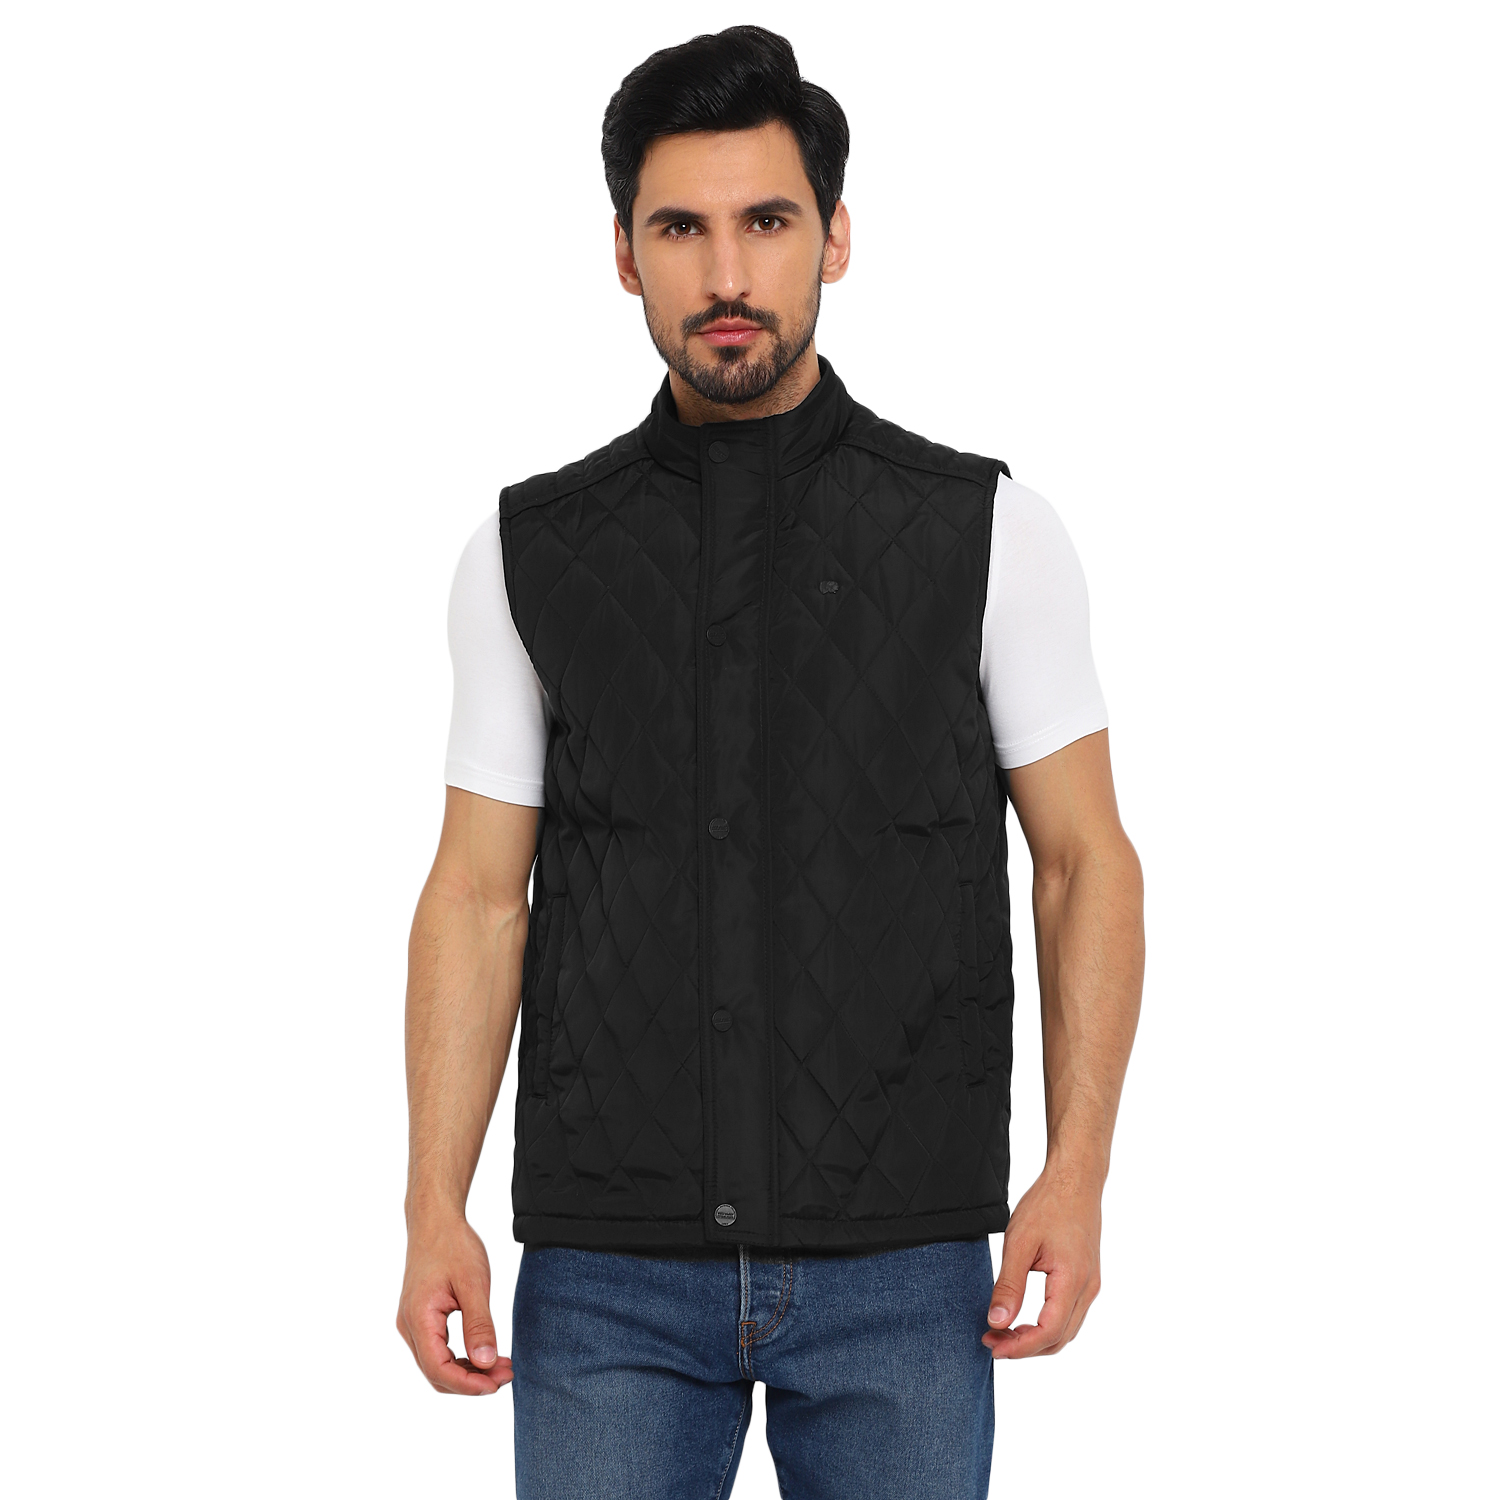 Redchief Black Solid Casual Sleeveless Jacket For Men